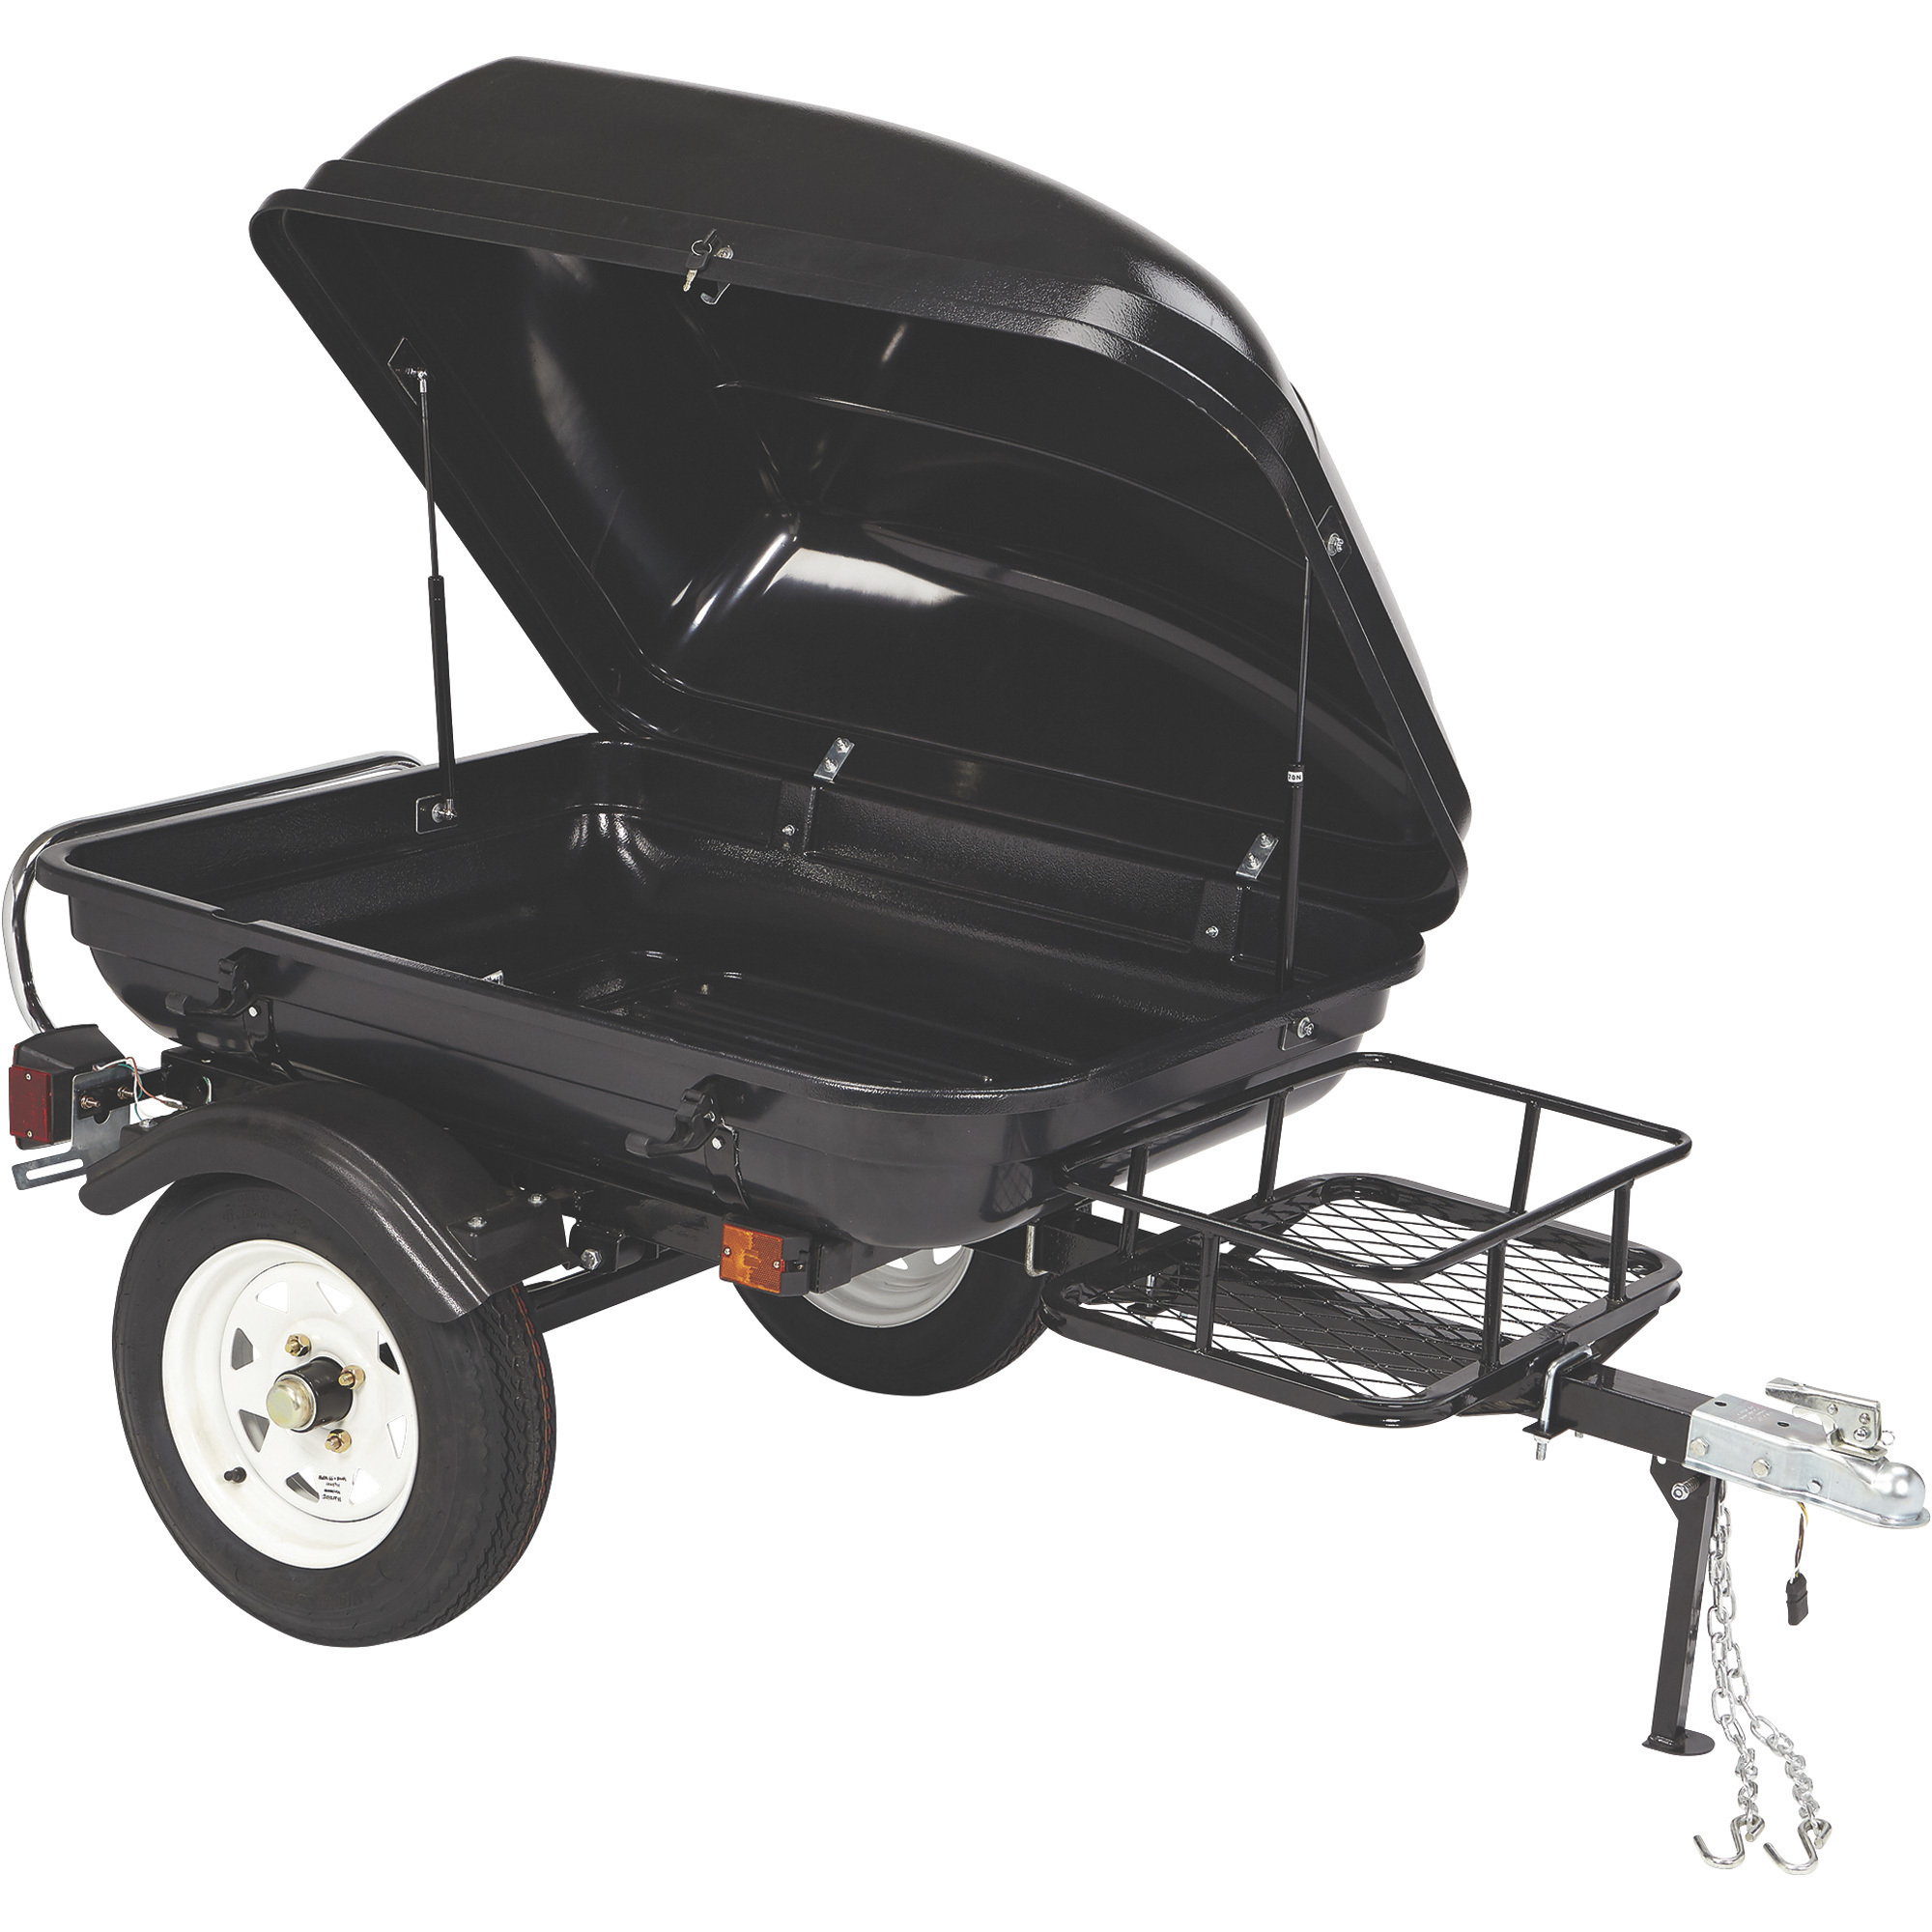 Ultra-Tow Tag-Along Pull Behind Motorcycle Cargo Trailer, Steel Frame, 16.6 Cu.Ft. Storage, 600-Lb. Load Capacity